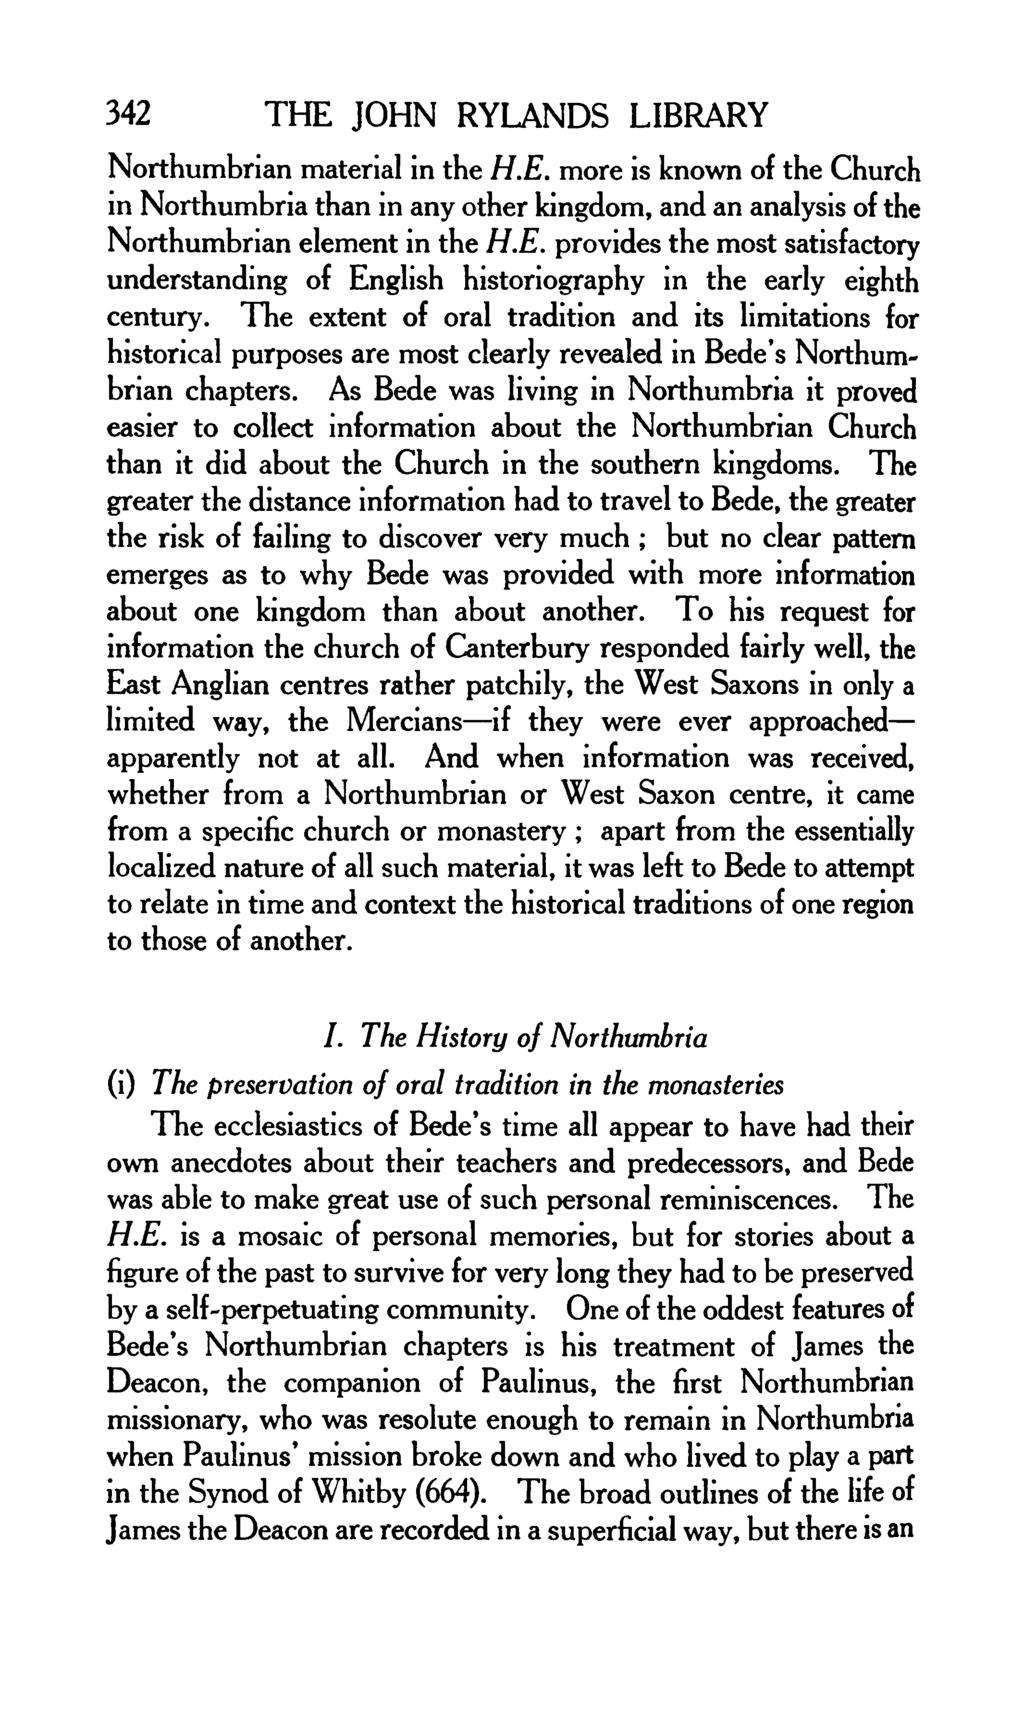 342 THE JOHN RYLANDS LIBRARY Northumbrian material in the H.E. more is known of the Church in Northumbria than in any other kingdom, and an analysis of the Northumbrian element in the H.E. provides the most satisfactory understanding of English historiography in the early eighth century.